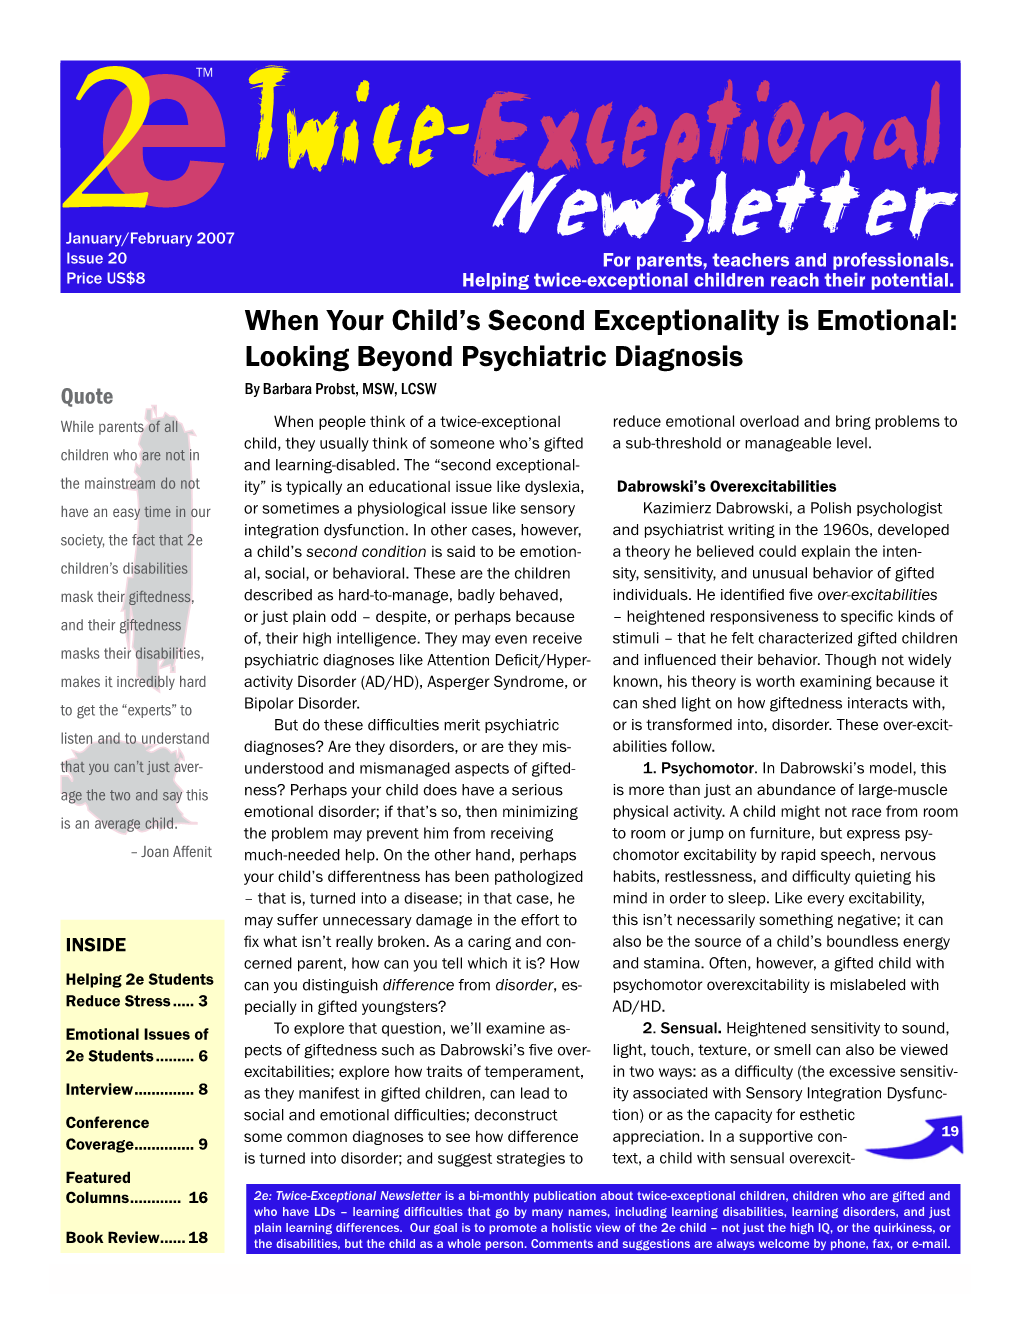 Twice-Exceptionale 2January/February 2007 Newsletter Issuee 20 for Parents, Teachers and Professionals